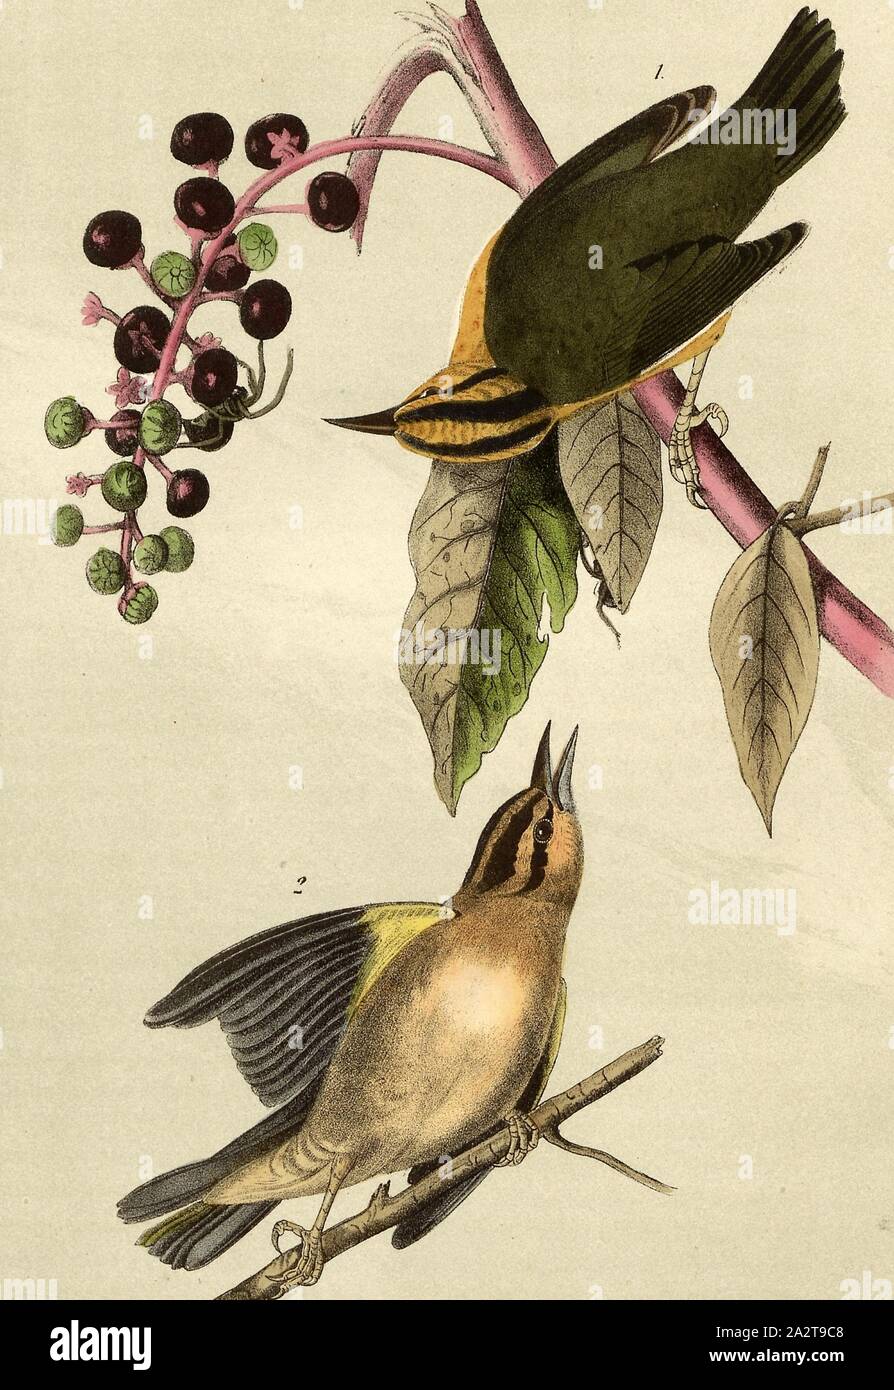 Worm eating Swamp-Warbler - American Poke-weed, Phytolacea decandra, Northern Redwood Warbler (Helmitheros vermivorum, Helinaia vermivora), American Pokeweed (phytolacca americana), Signed: J.J. Audubon, J.T. Bowen, lithograph, Pl. 105 (vol. 2), Audubon, John James (drawn); Bowen, J. T. (lith.), 1856, John James Audubon: The birds of America: from drawings made in the United States and their territories. New York: Audubon, 1856 Stock Photo